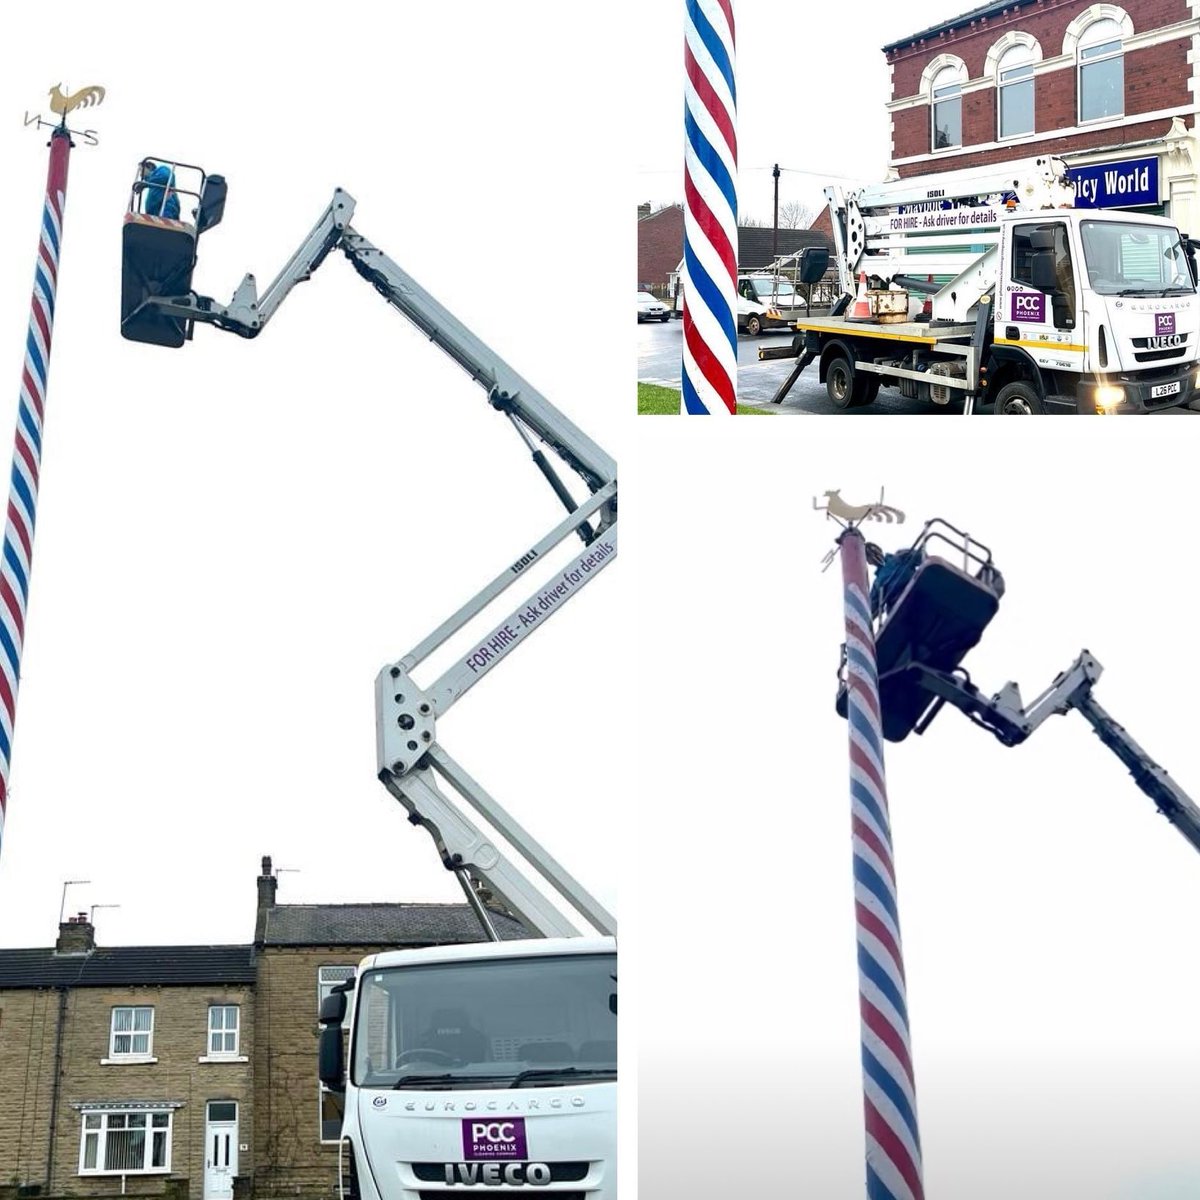 PCC - USING OUR CHERRY PICKER TO SUPPORT THE LOCAL COMMUNITY

PCC offers cherry picker hire services, for more info call 0330 124 4085 buff.ly/3AM51oF 

#cherrypickerhire #localsupport #leeds #commercialaccessequipment